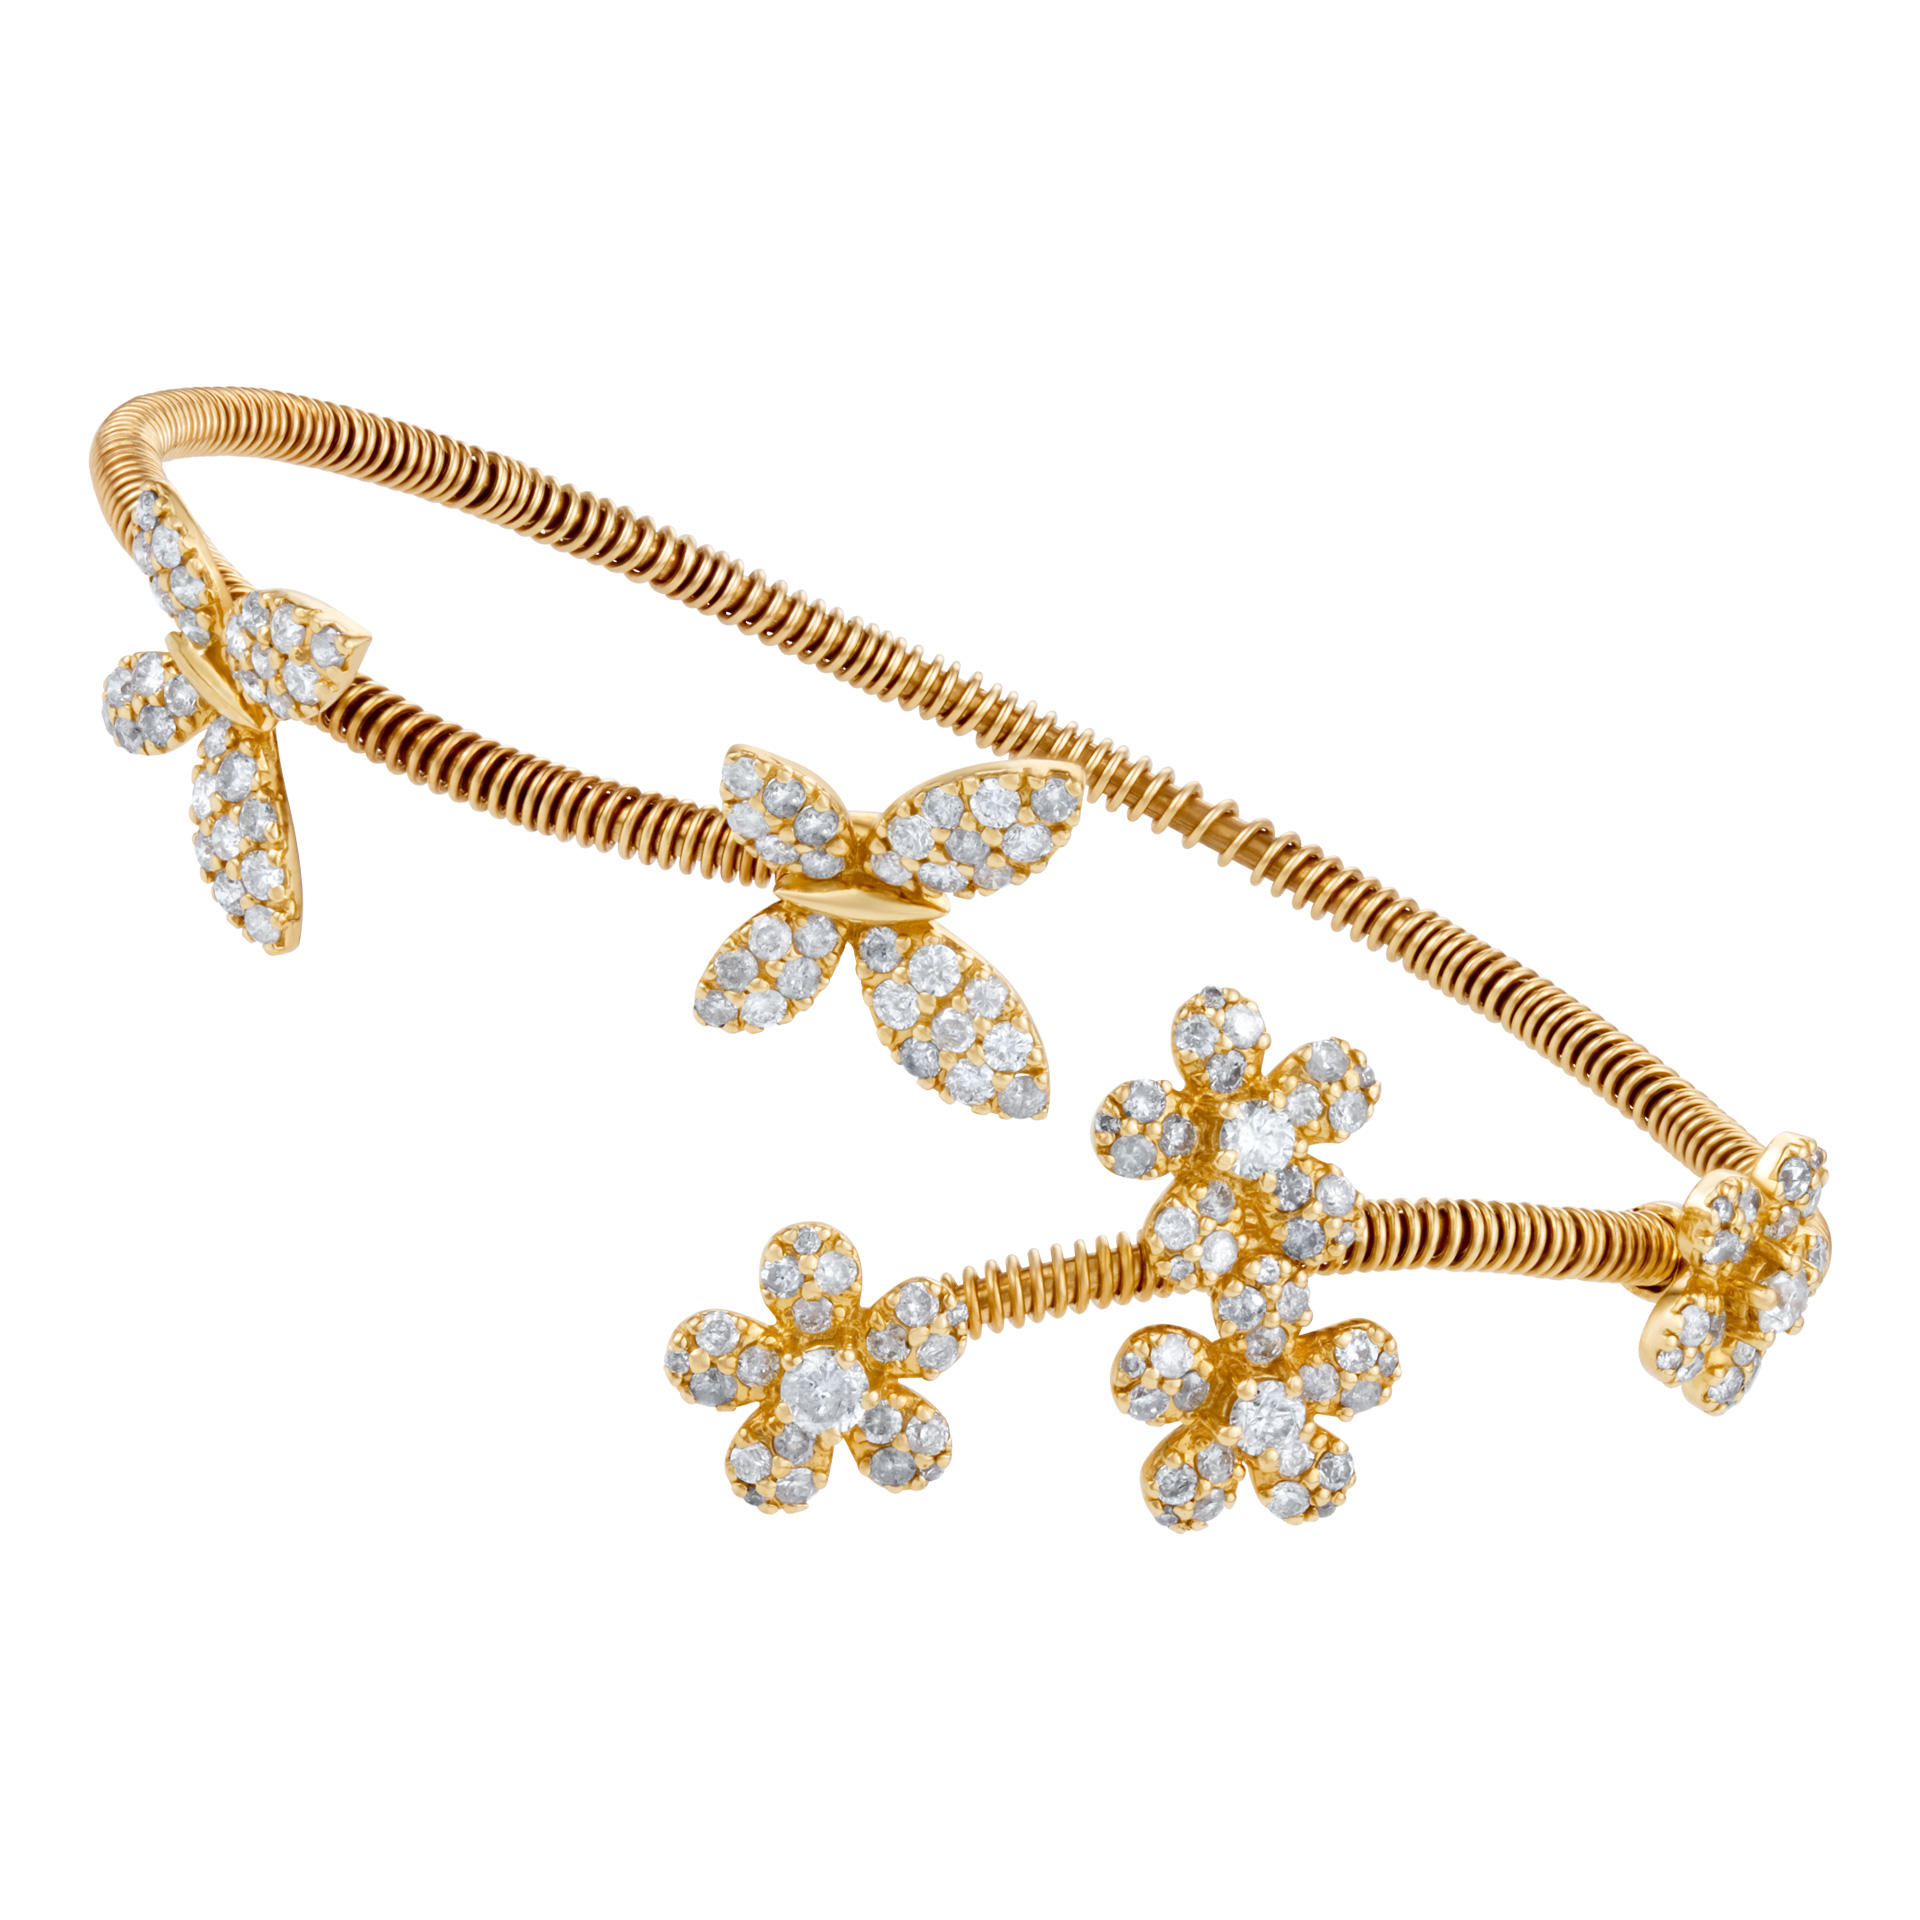 Flower and butterfly diamond bangle in 14k